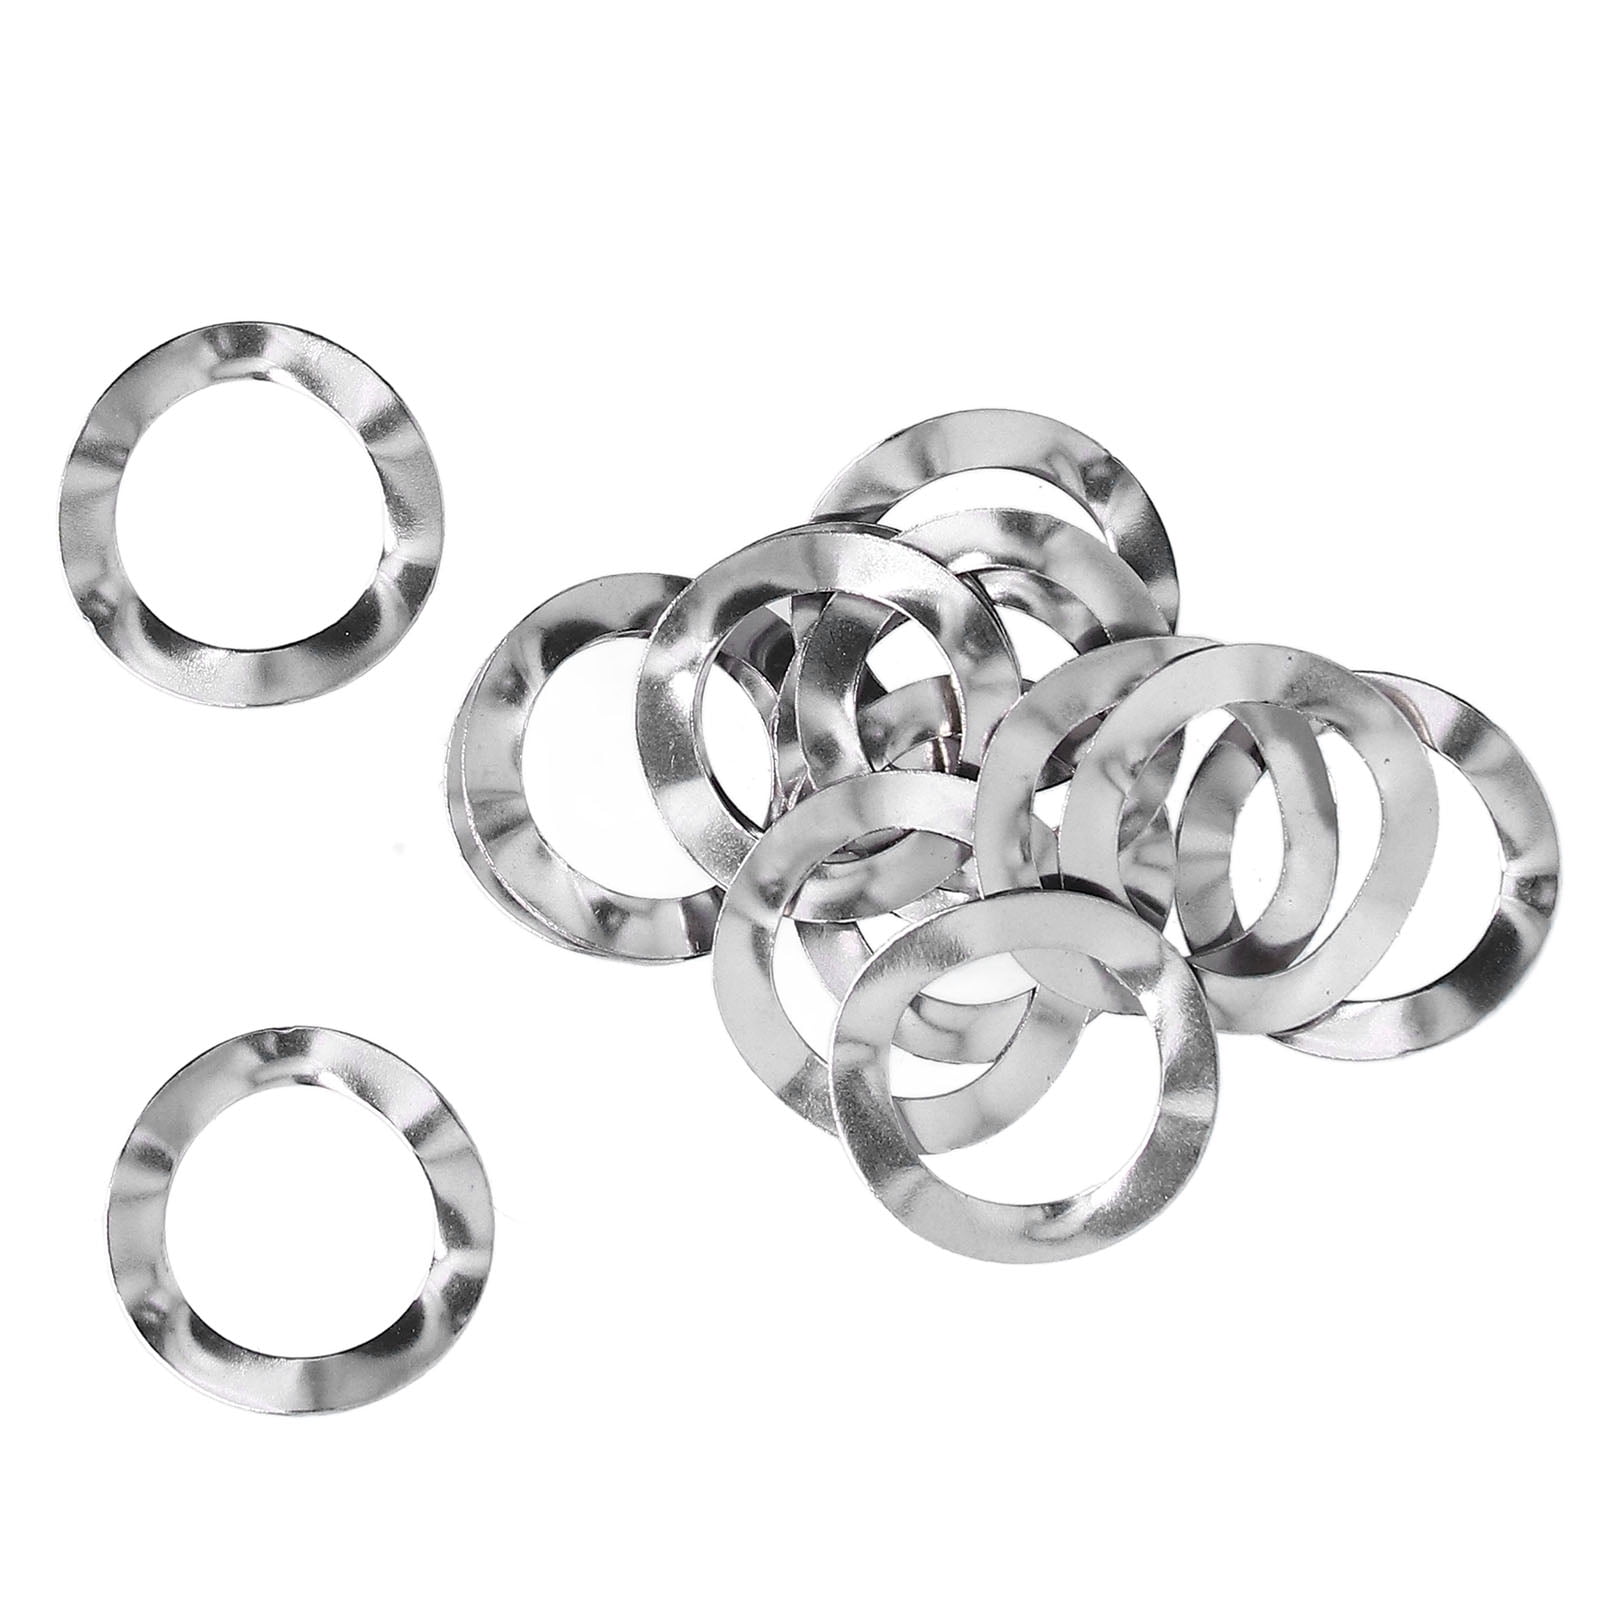 100Pcs Wave Washer Assortment Kit Stainless Steel Three Wave Gasket A2 Stainless Steel Fastener Hardware M10 